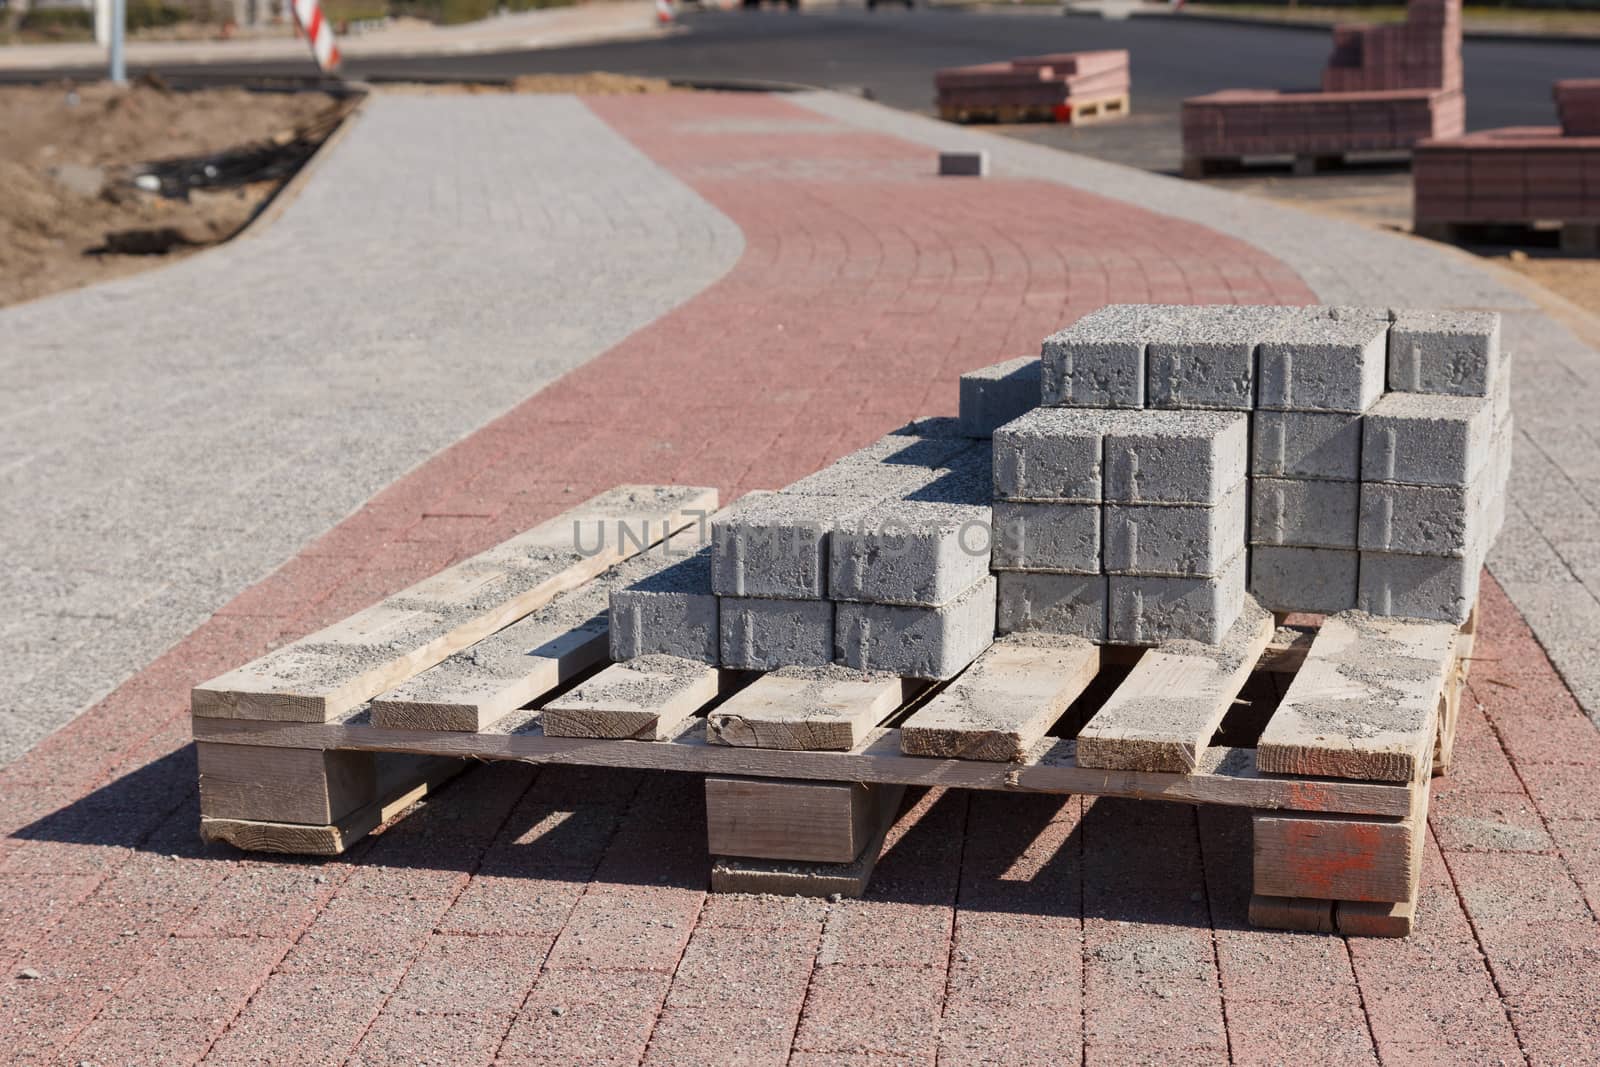 A bunch of road construction bricks placed on a wooden supporter